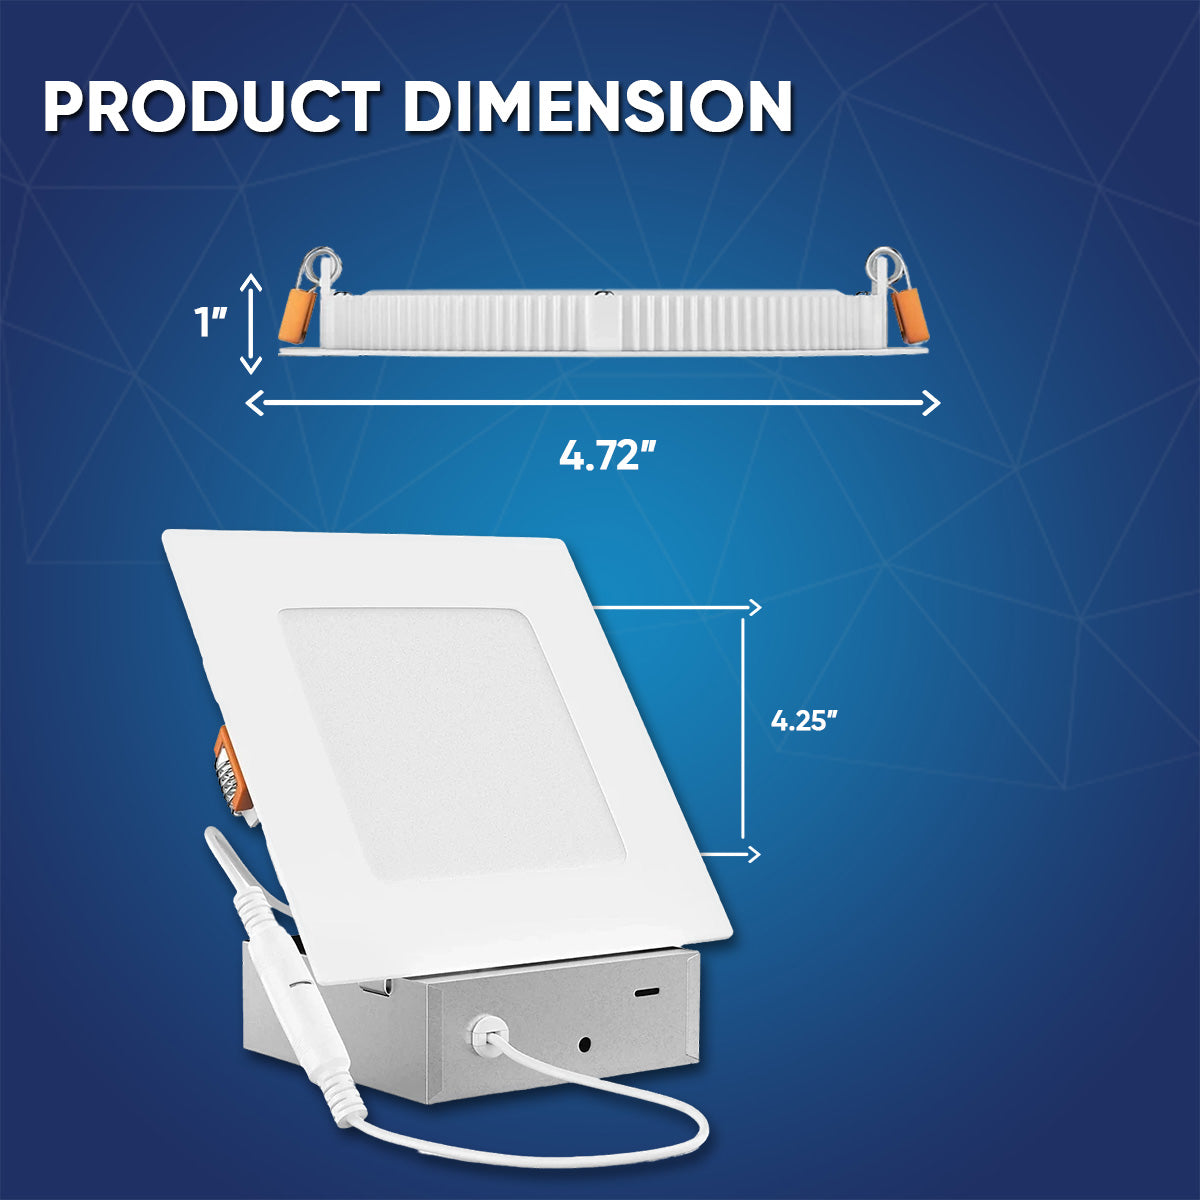 LED Slim Panel Recessed Ceiling Light- Product Dimension